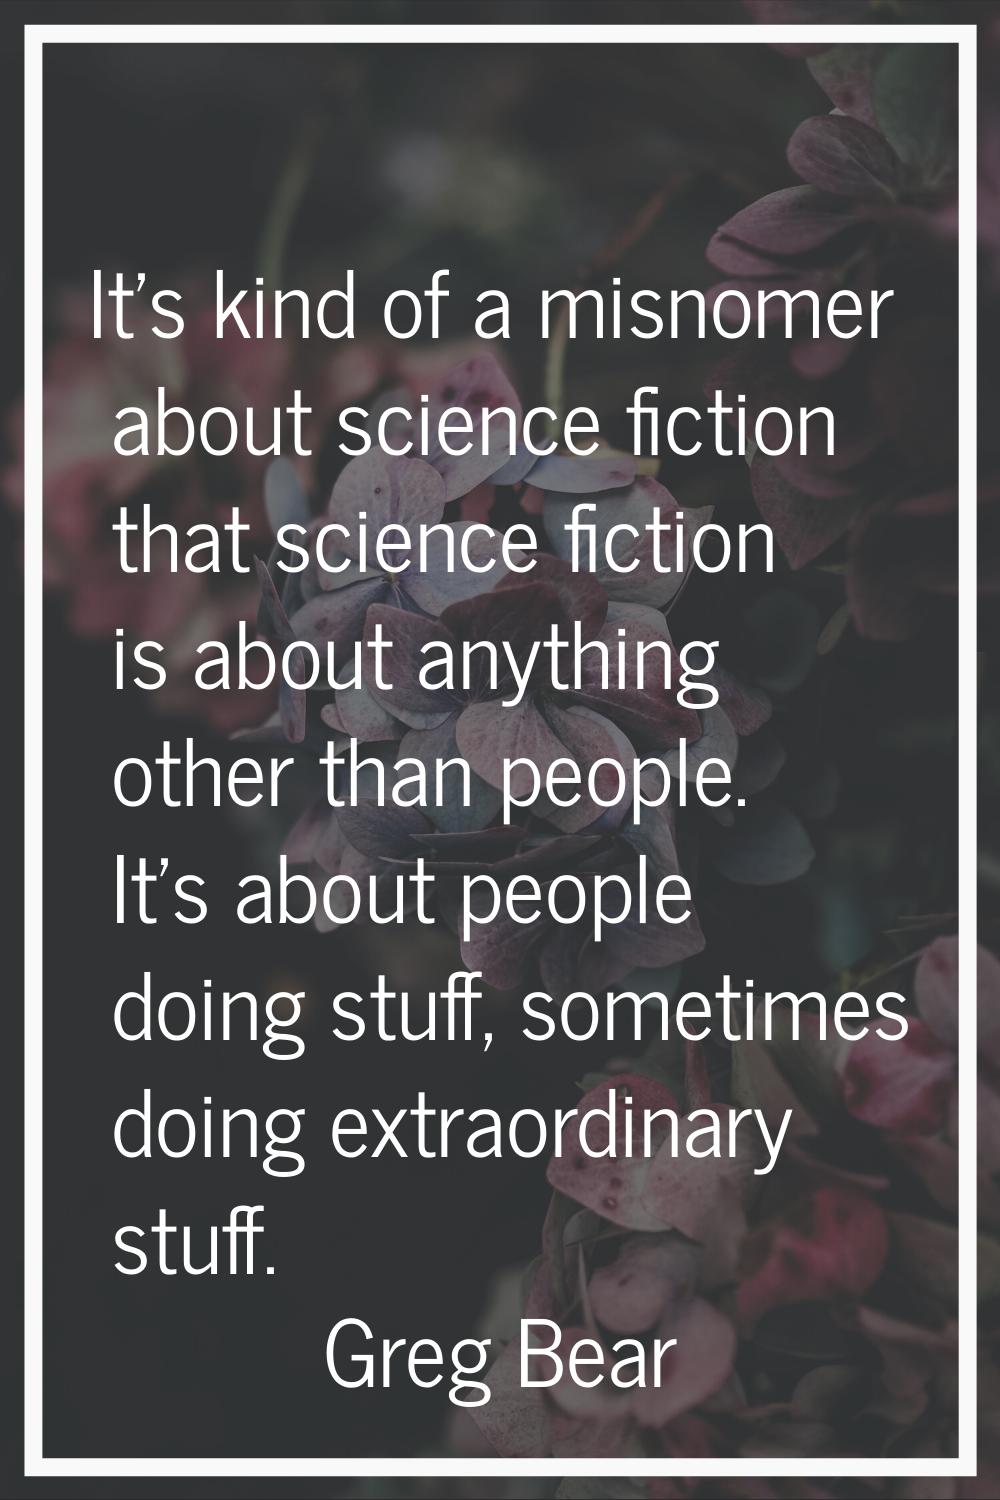 It's kind of a misnomer about science fiction that science fiction is about anything other than peo